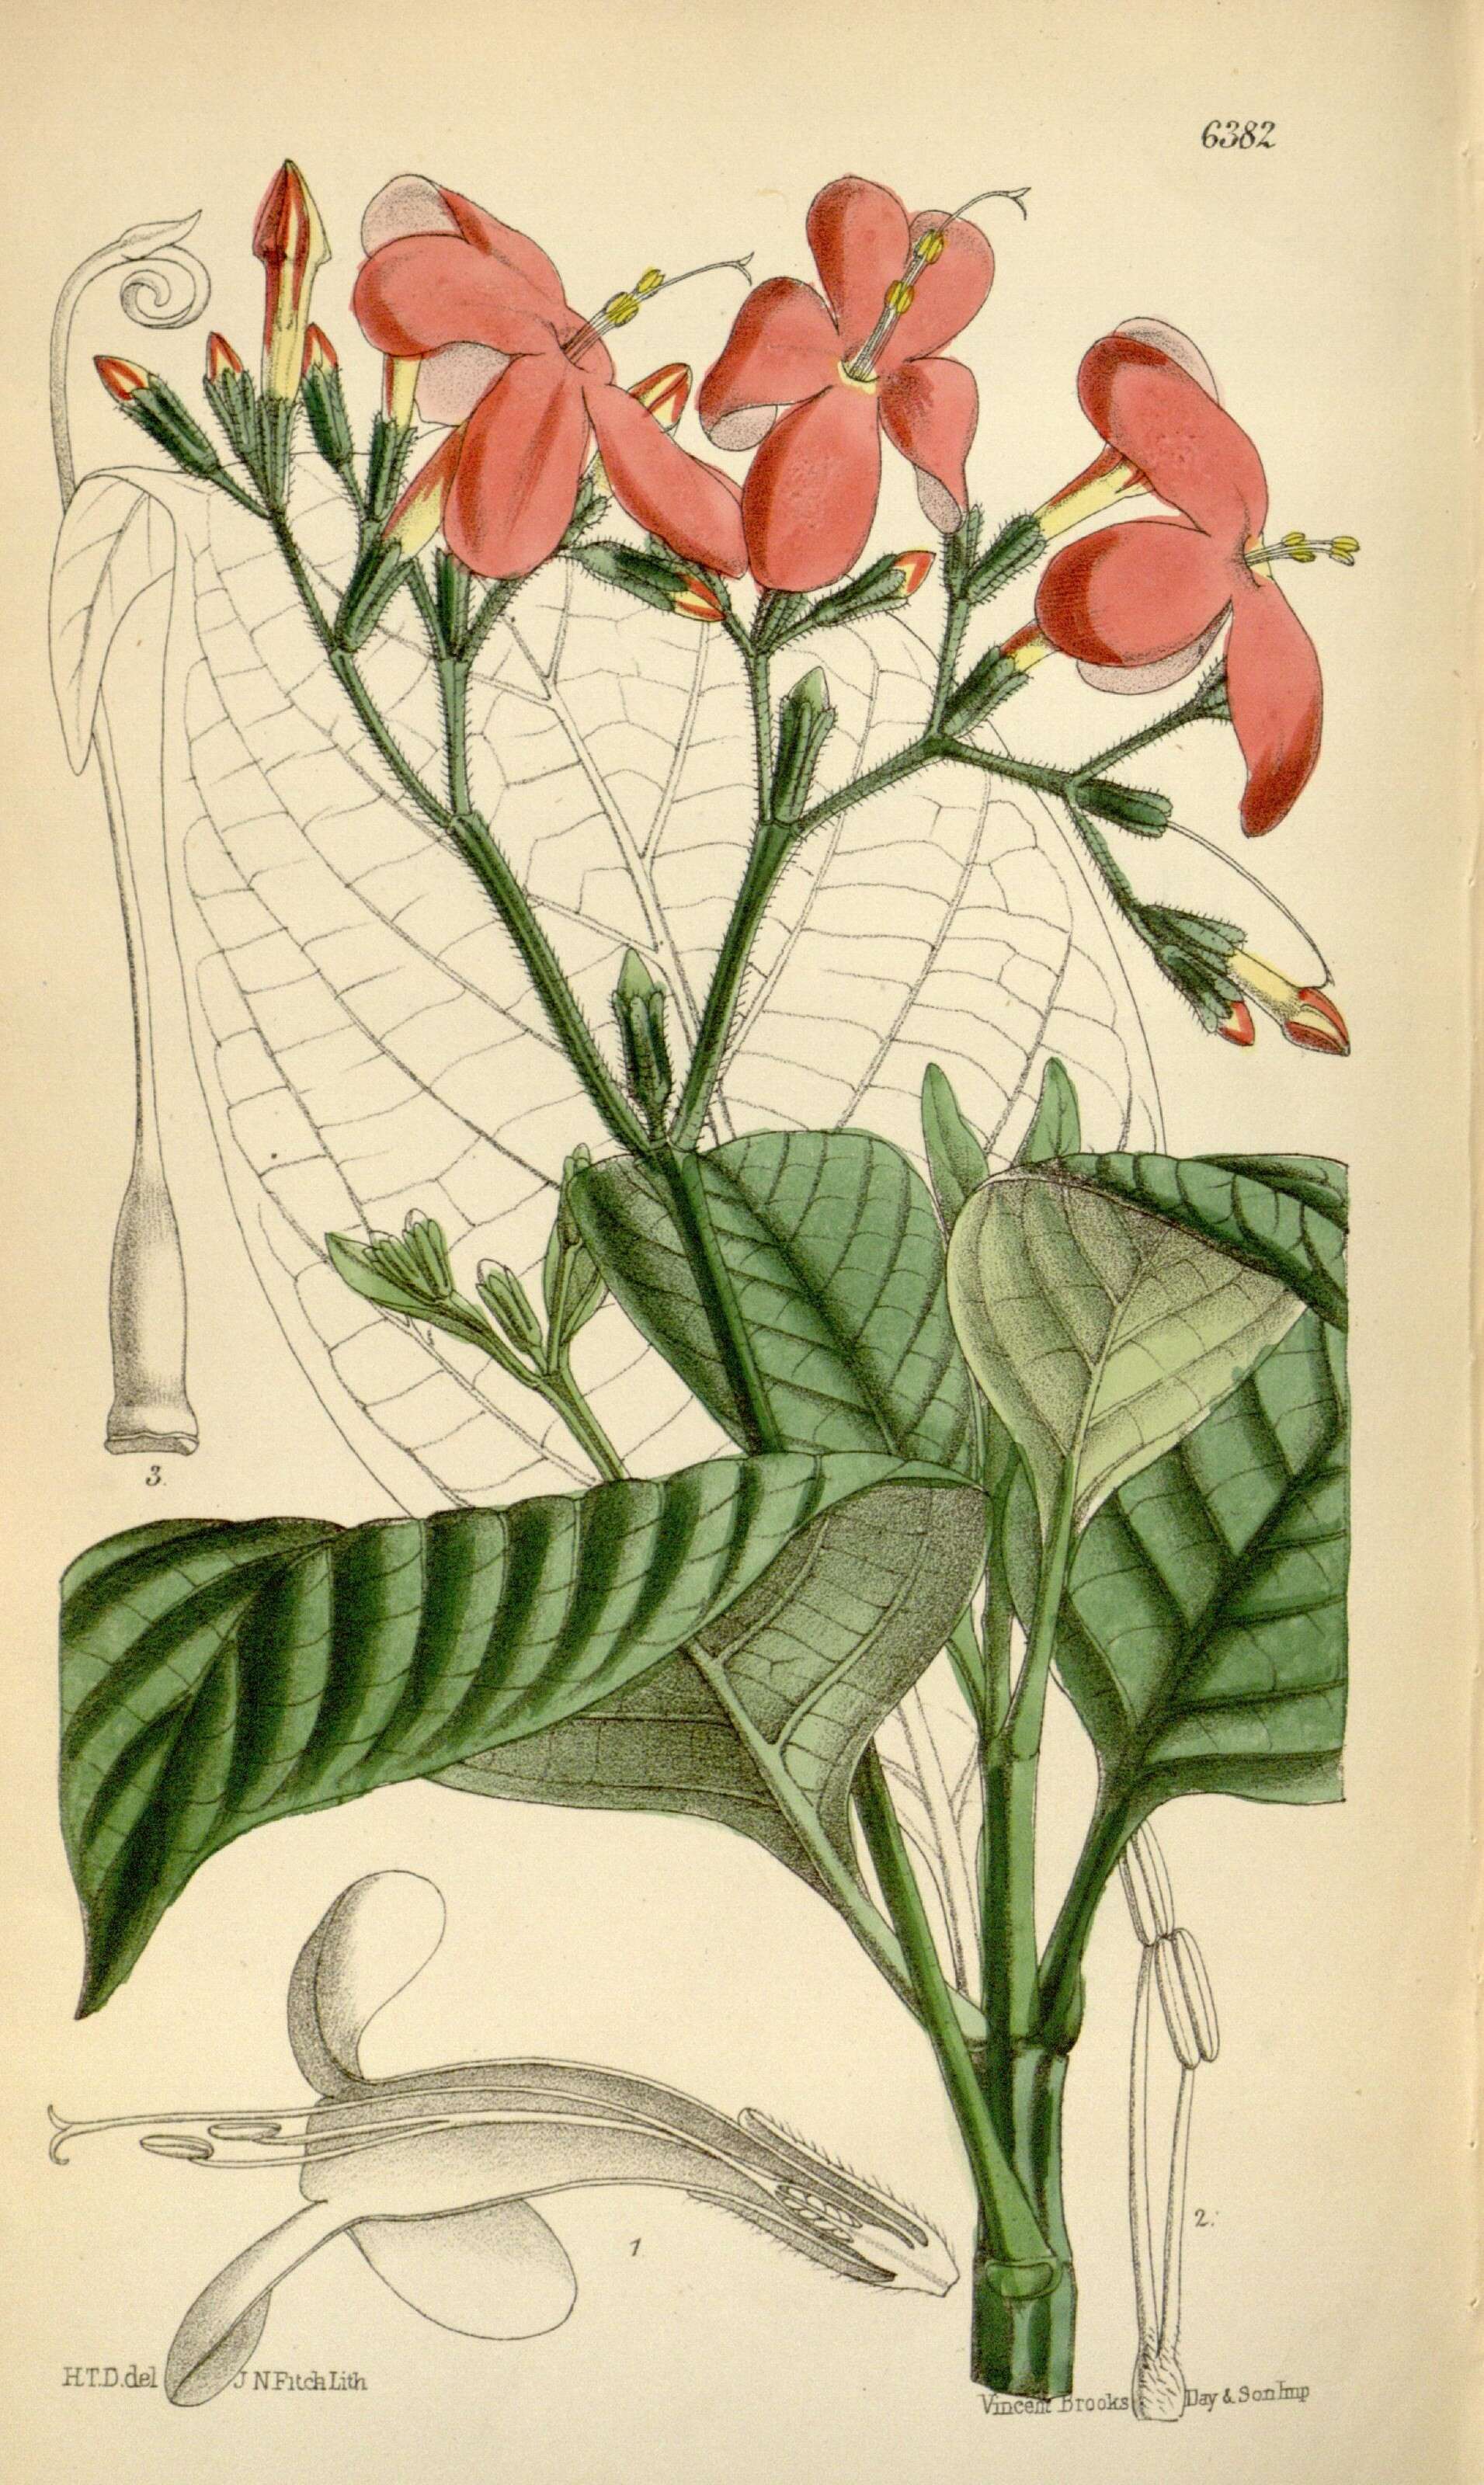 Image of acanthus family